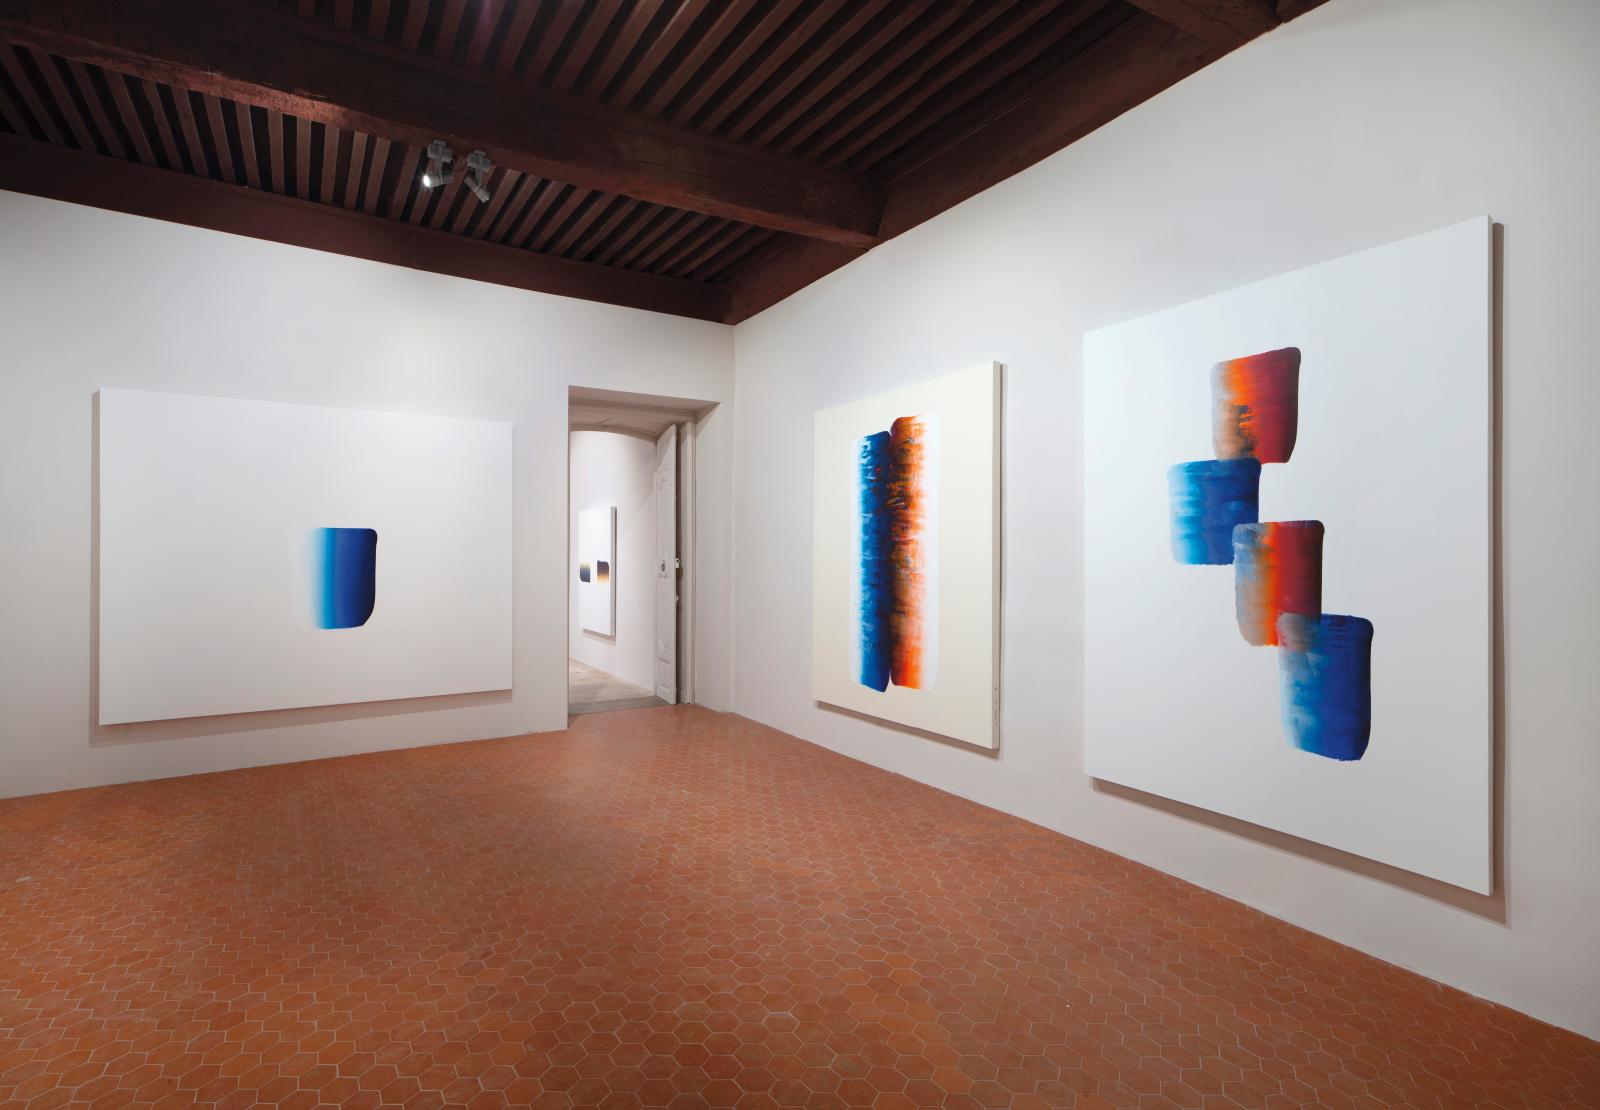 The large-scale paintings (2016 and 2018).© Adagp Lee Ufan, photo archives kamel mennourCourtesy of the artist and kamel mennour, Paris